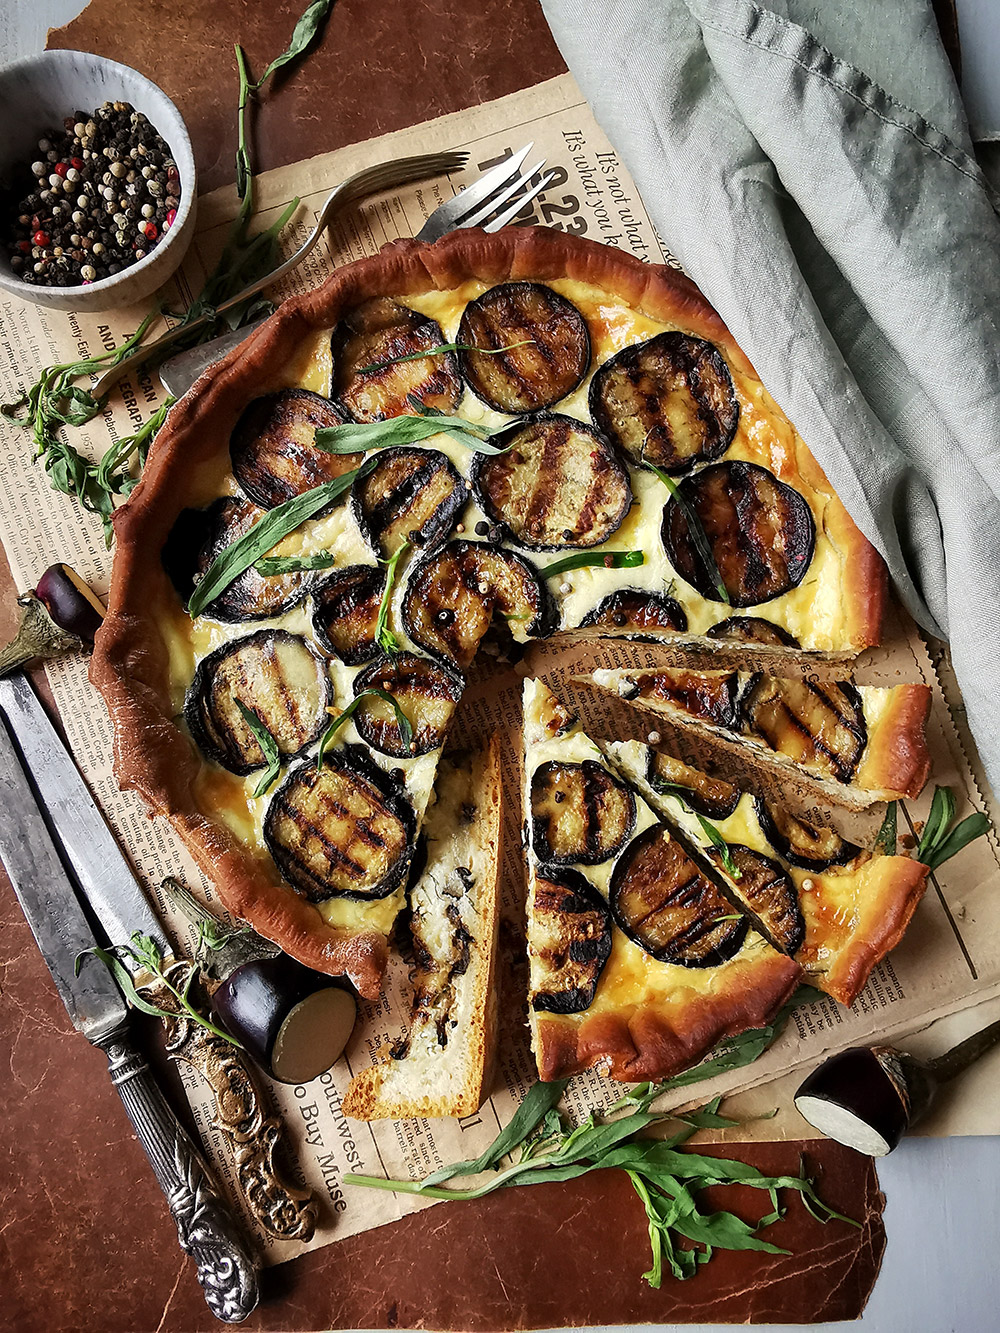 Grilled eggplant quiche